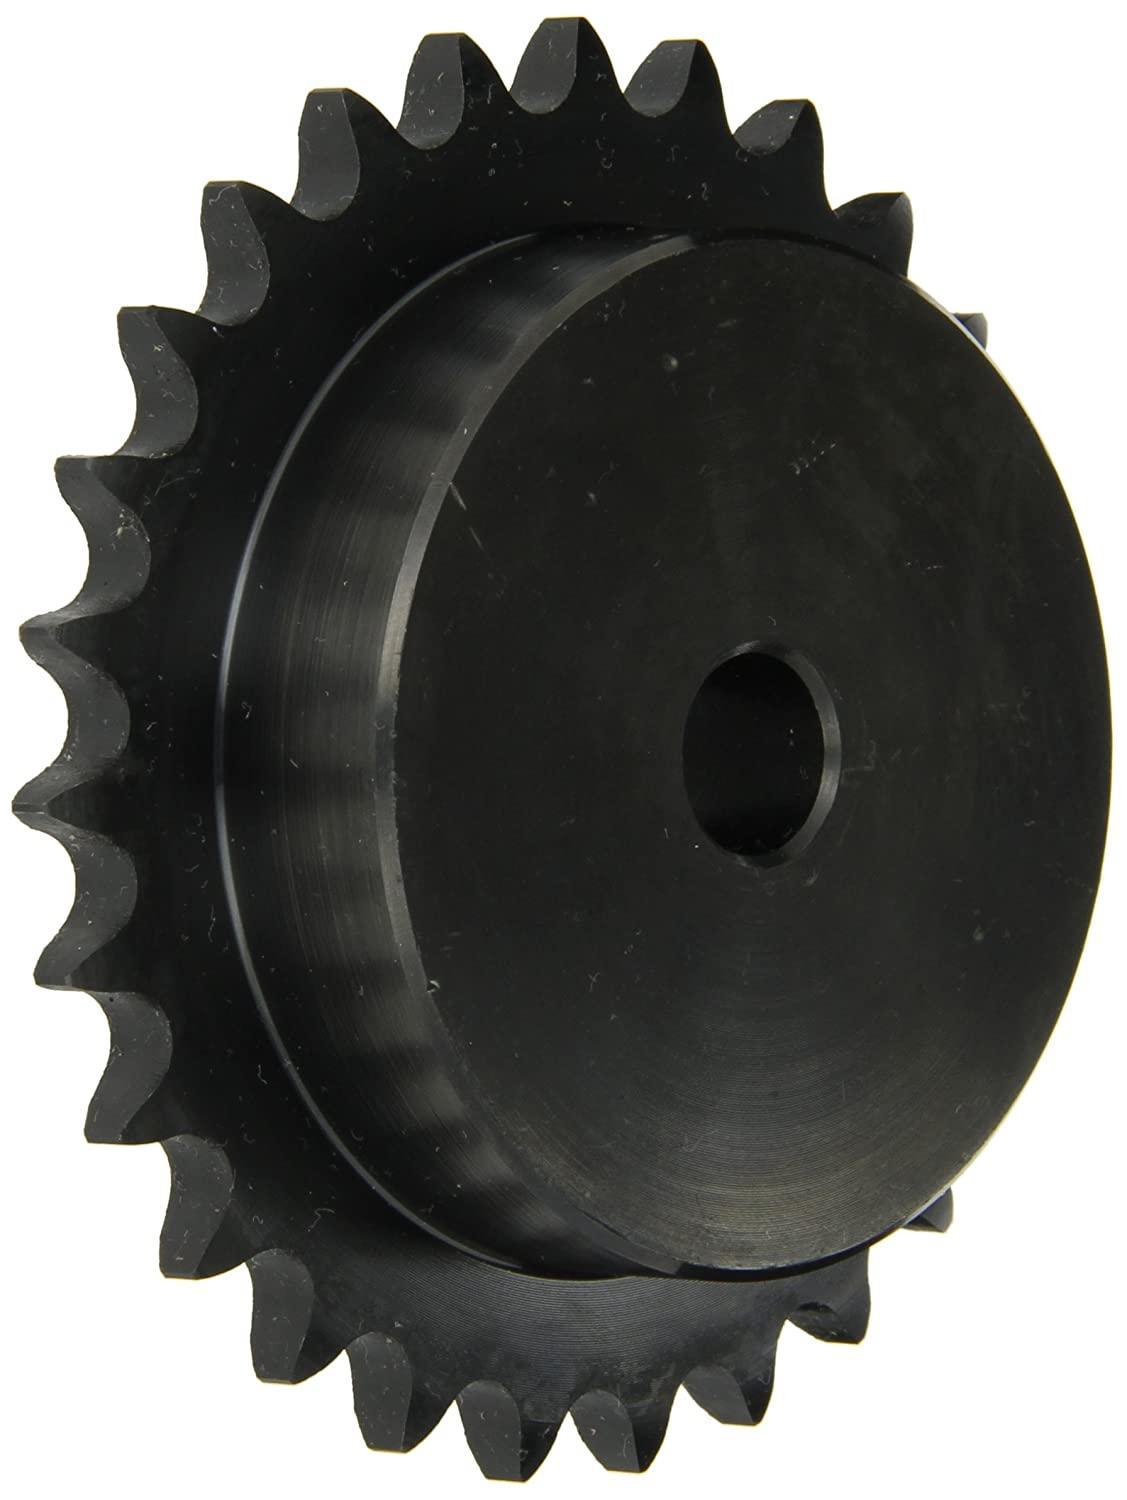 25B21 Roller Chain Sprocket With Stock Bore - Forces Inc